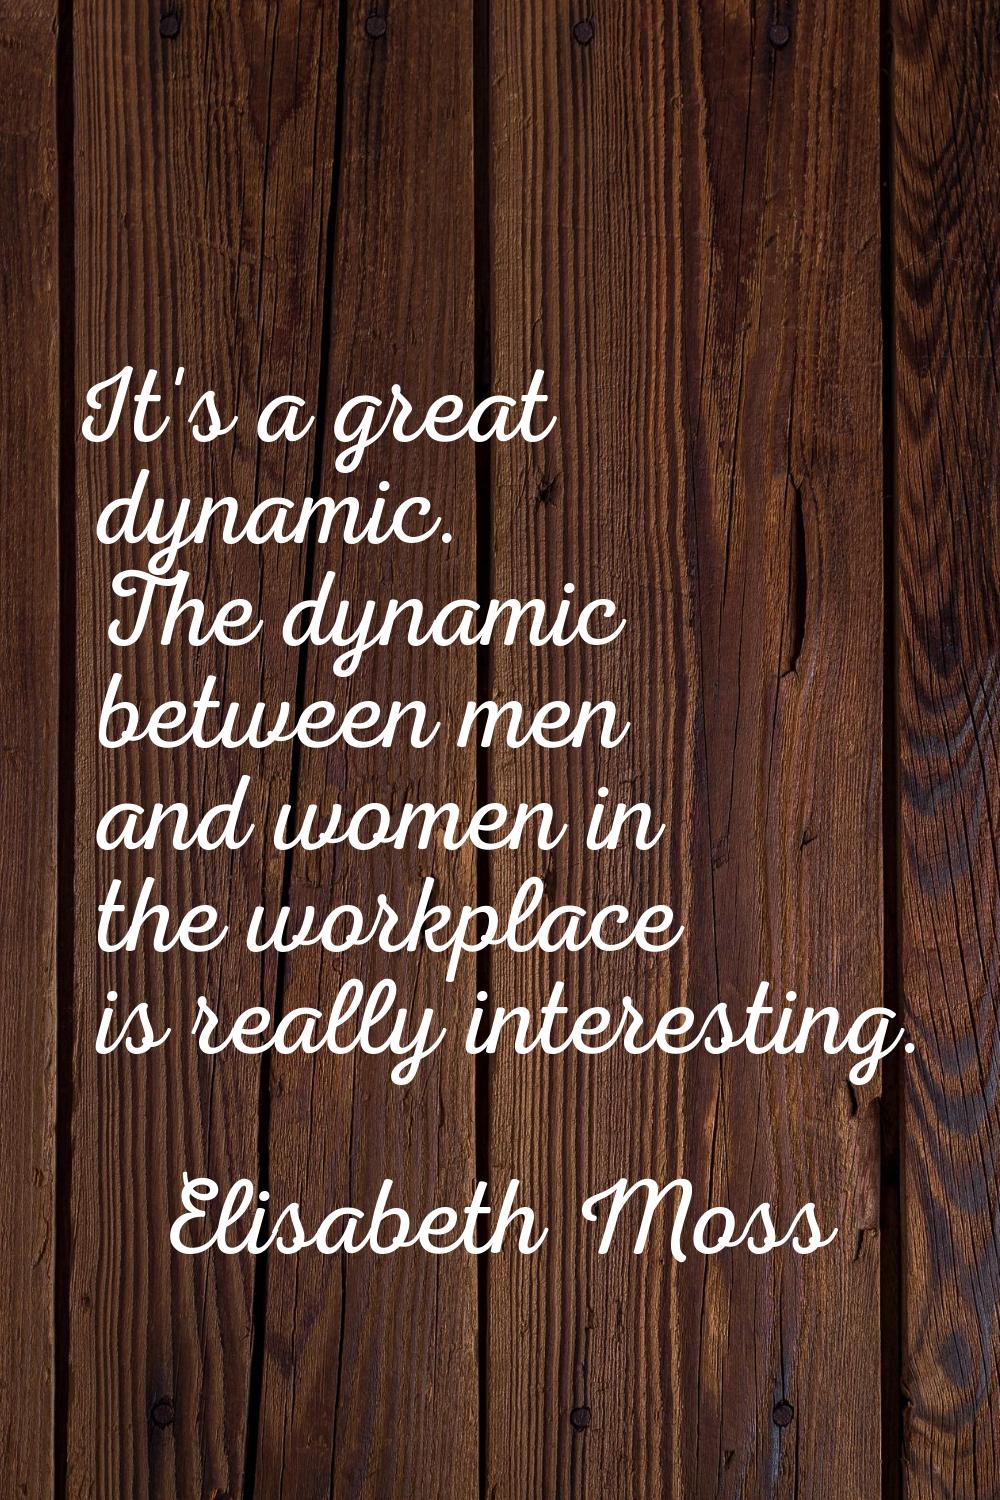 It's a great dynamic. The dynamic between men and women in the workplace is really interesting.